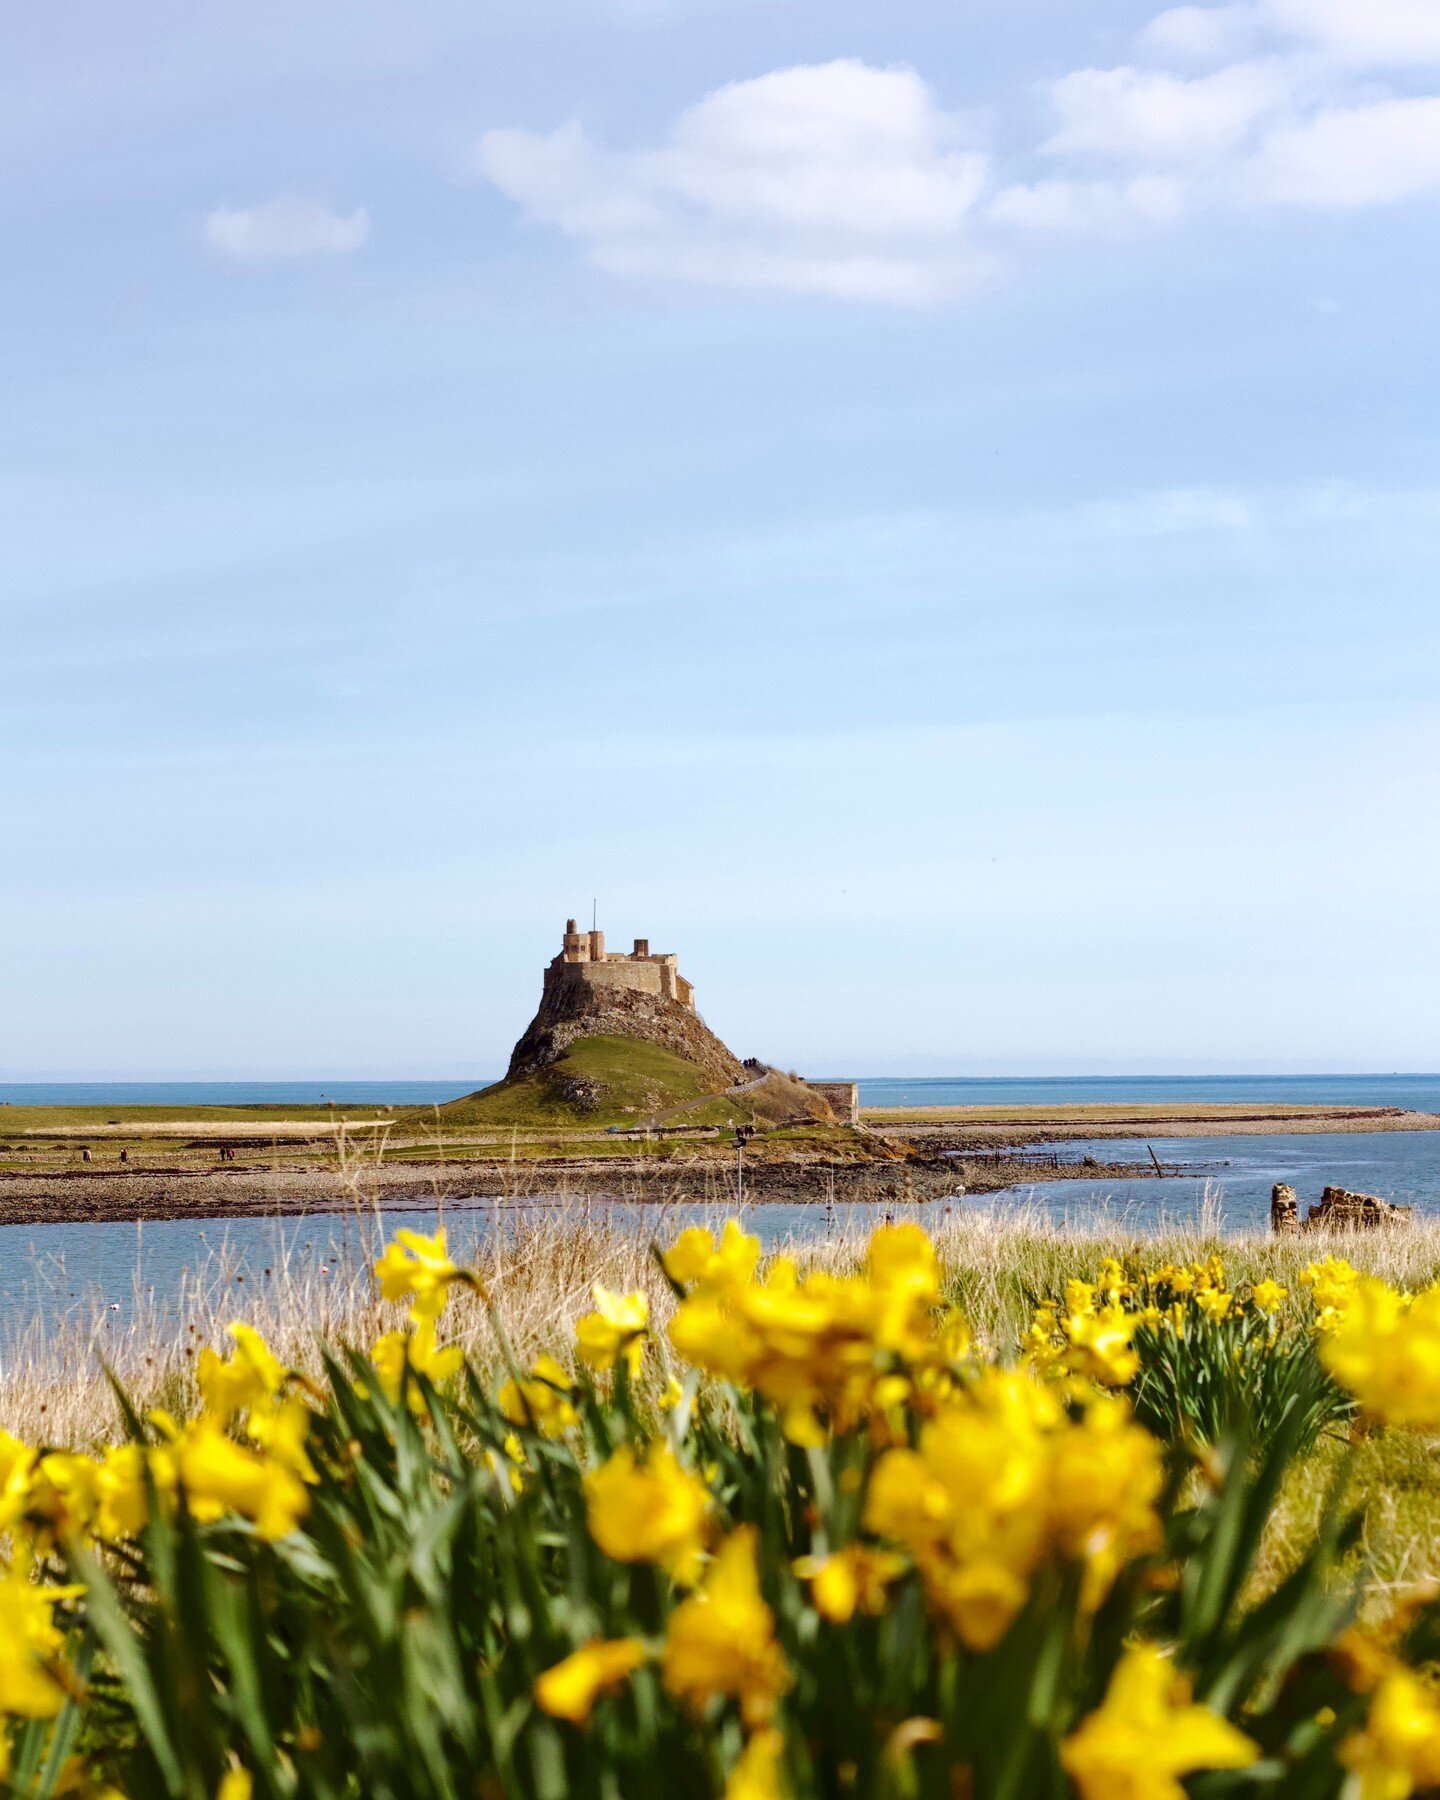 Pictures of the sea surrounding Lindisfarne are on the blog. www.miabcreative.com

Wishing I was smelling the sharp tang of ocean air and hearing the gulls cry! 

#holyislandoflindisfarne #lindisfarnecastle #northumberland #northumberlandcoast #engla